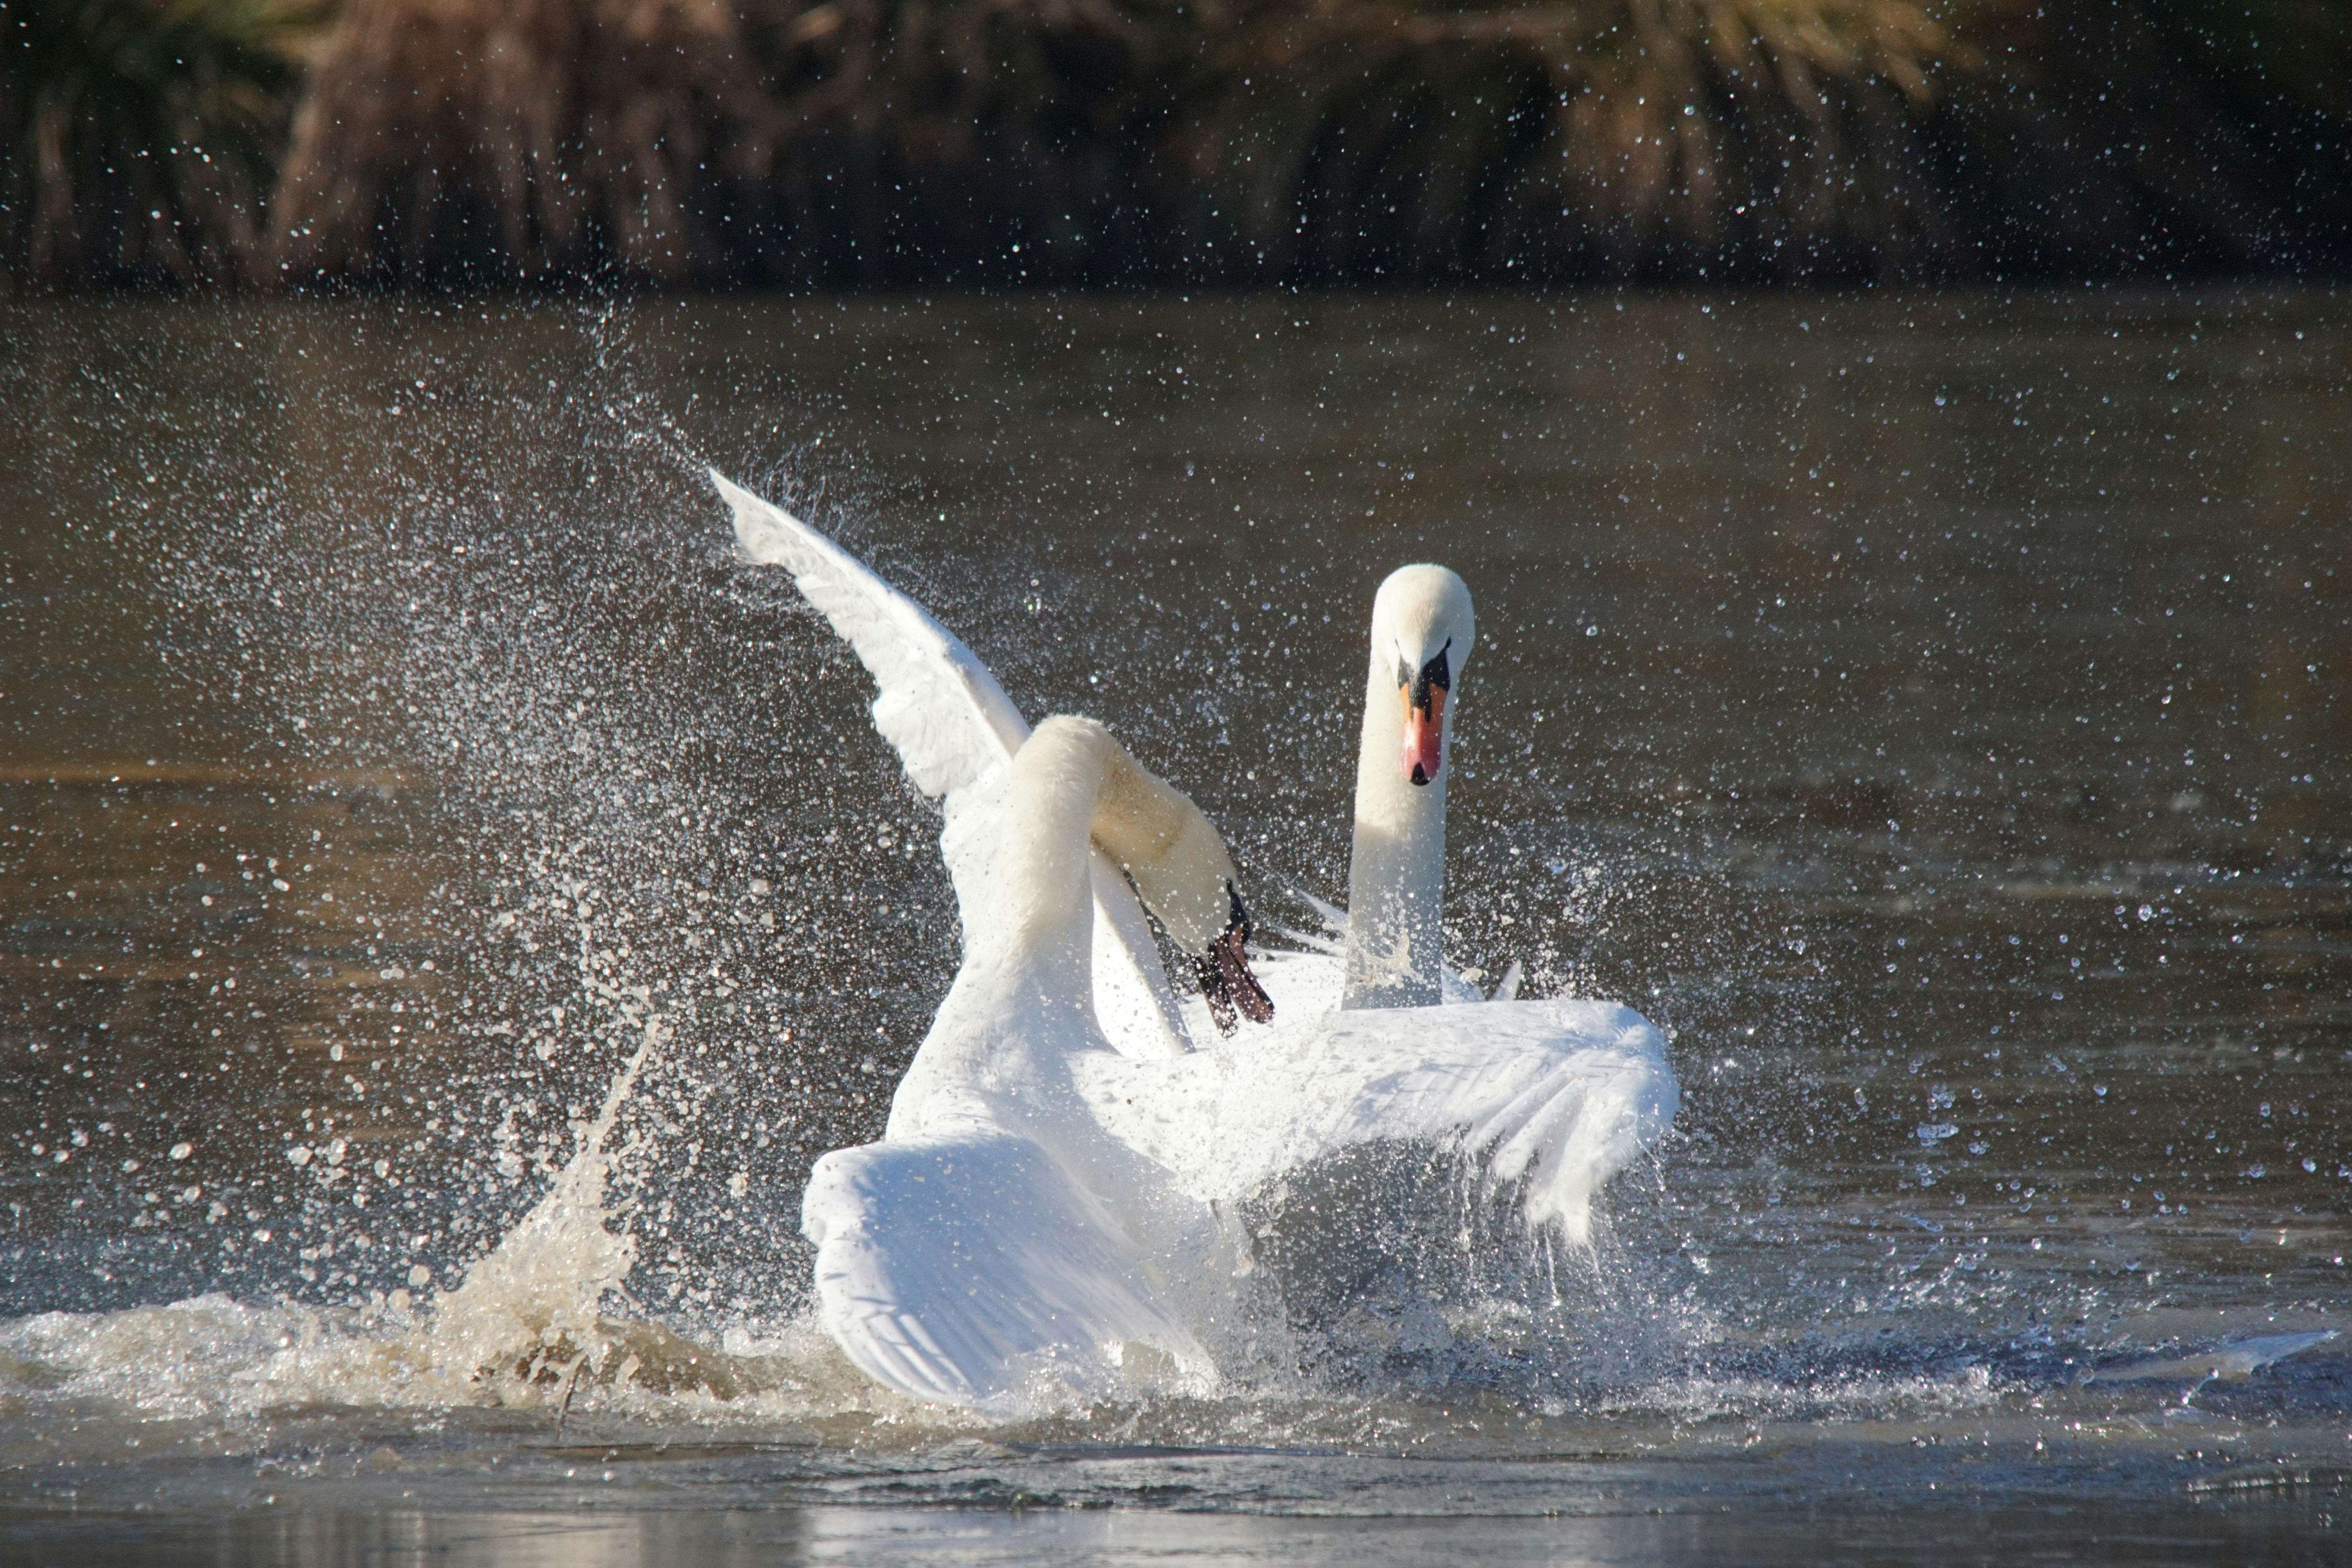 Two swans fighting in a frozen pond